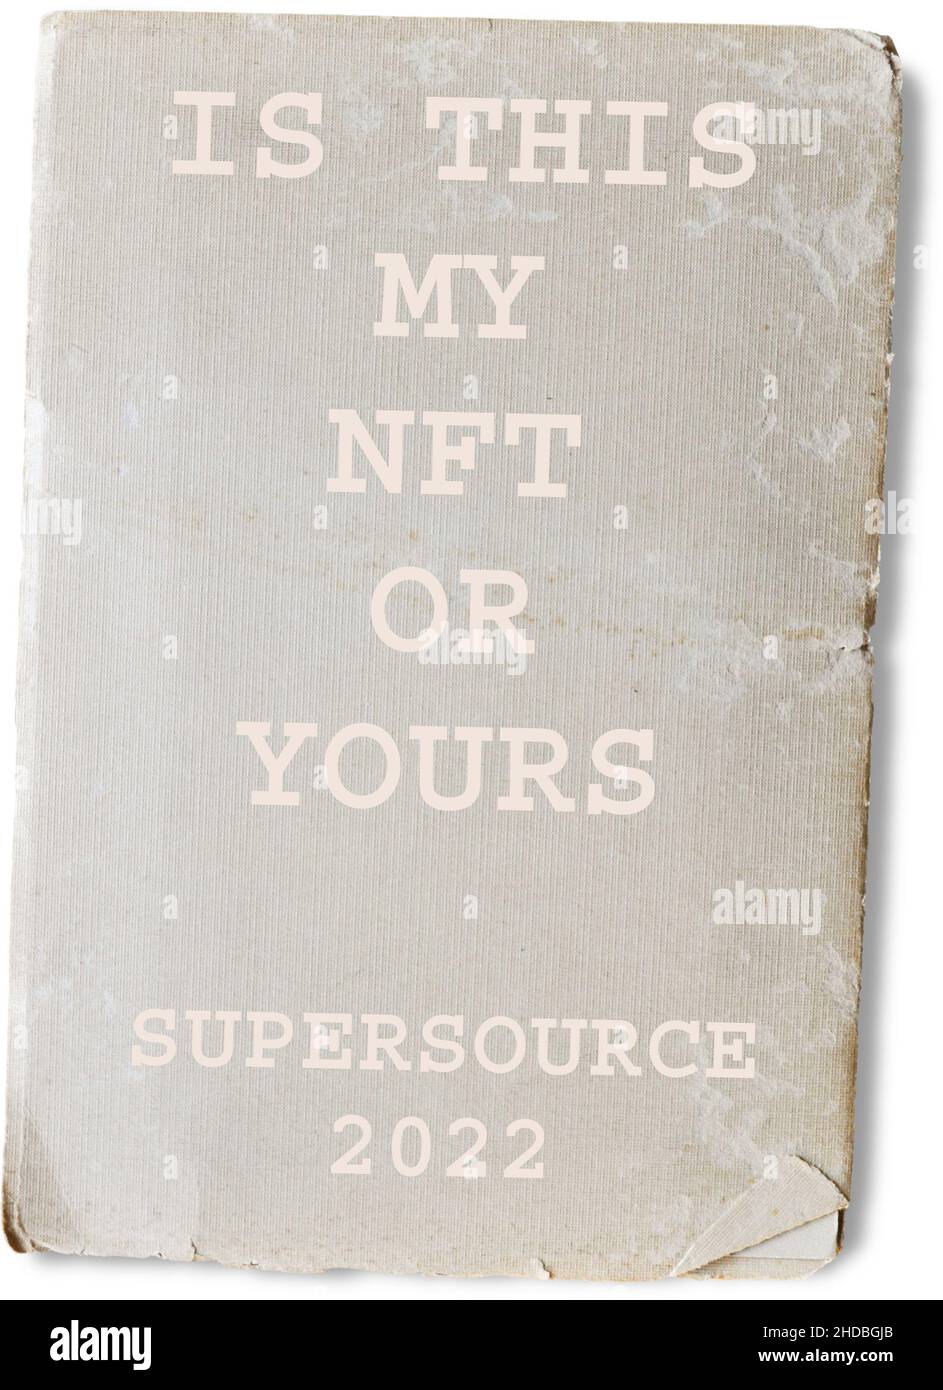 NFT Blockchain Fungible Token Art Supersource Book Stock Photo